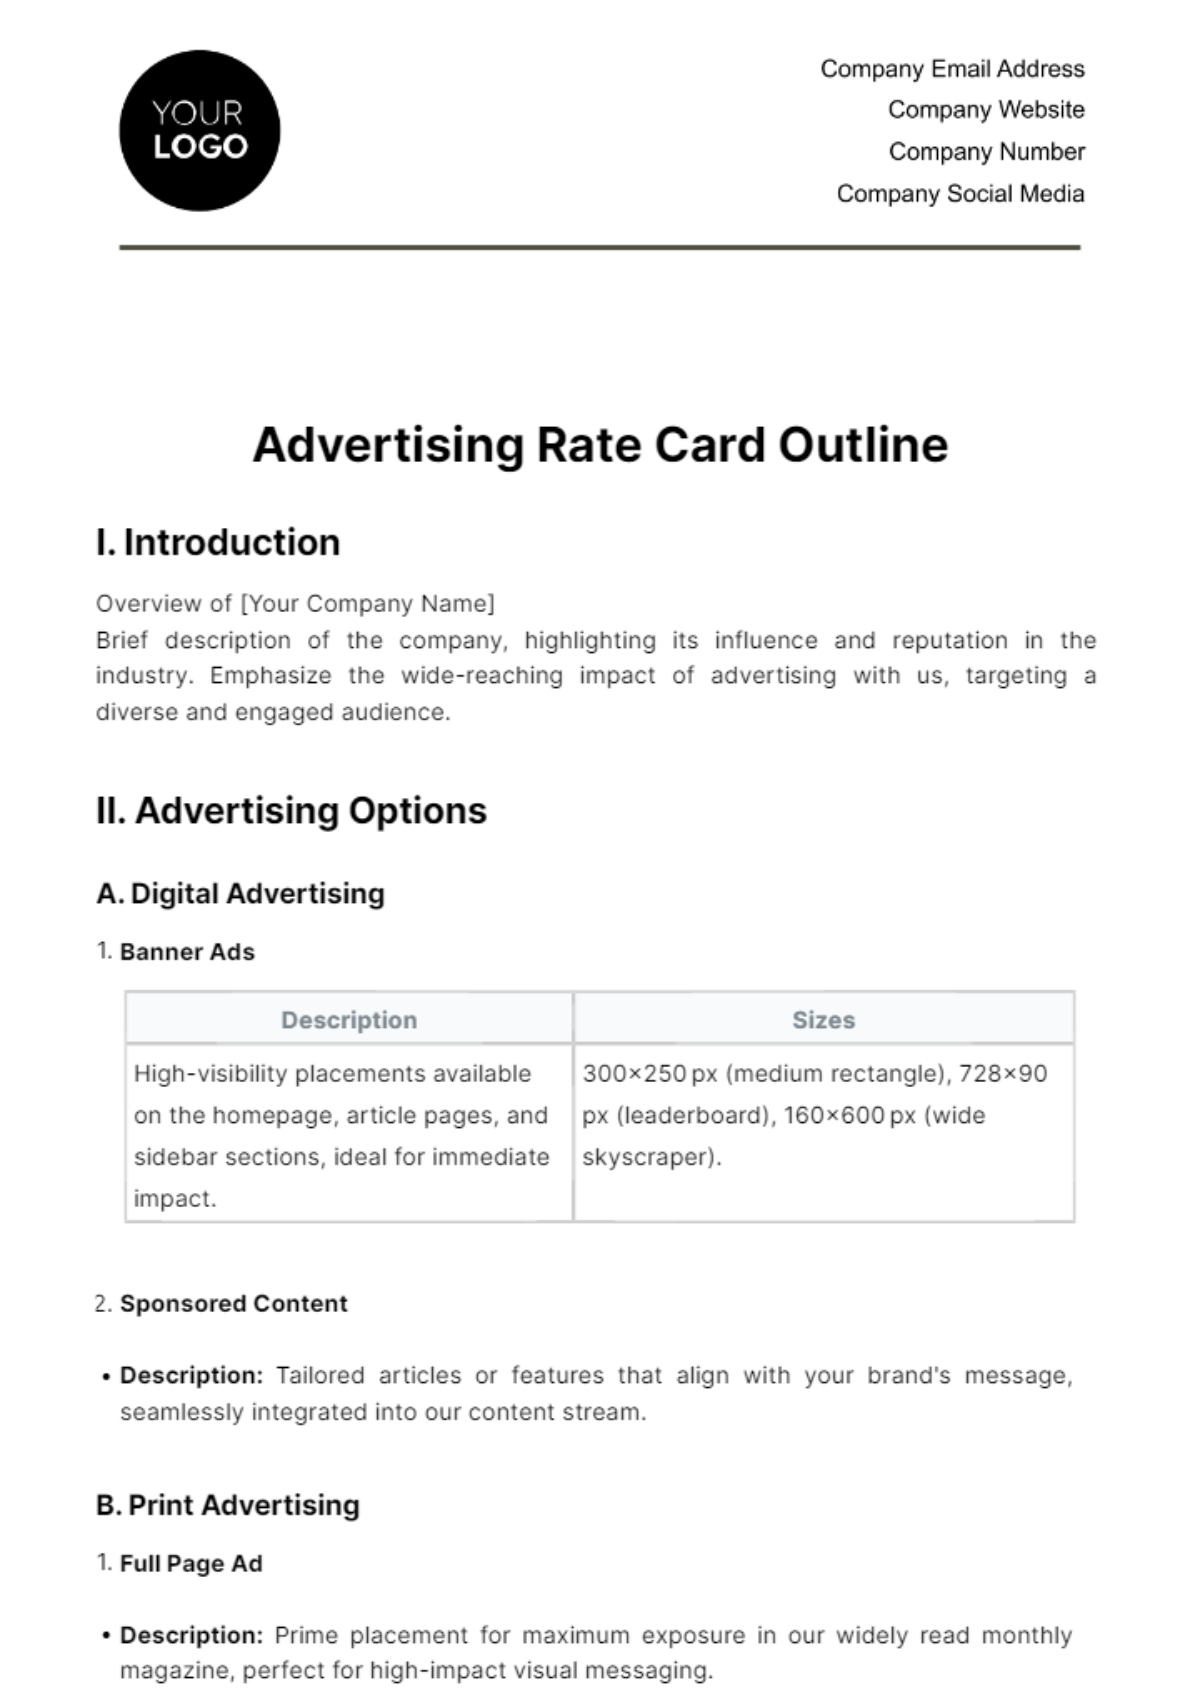 Advertising Rate Card Outline Template